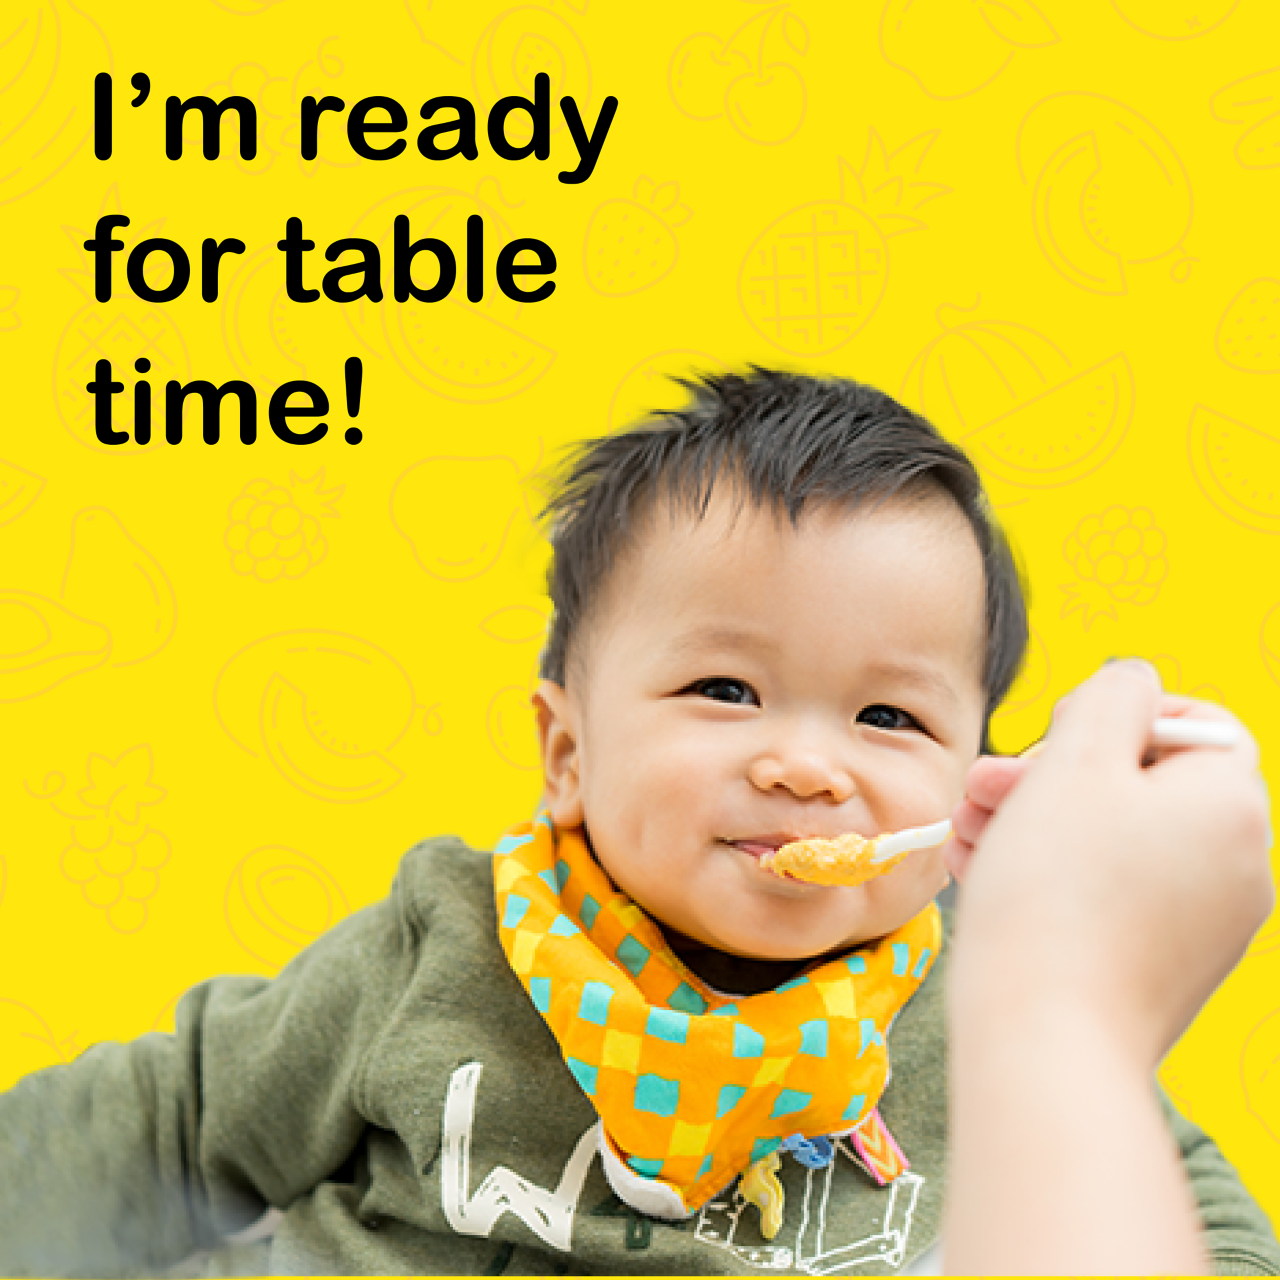 I'm ready for table time!